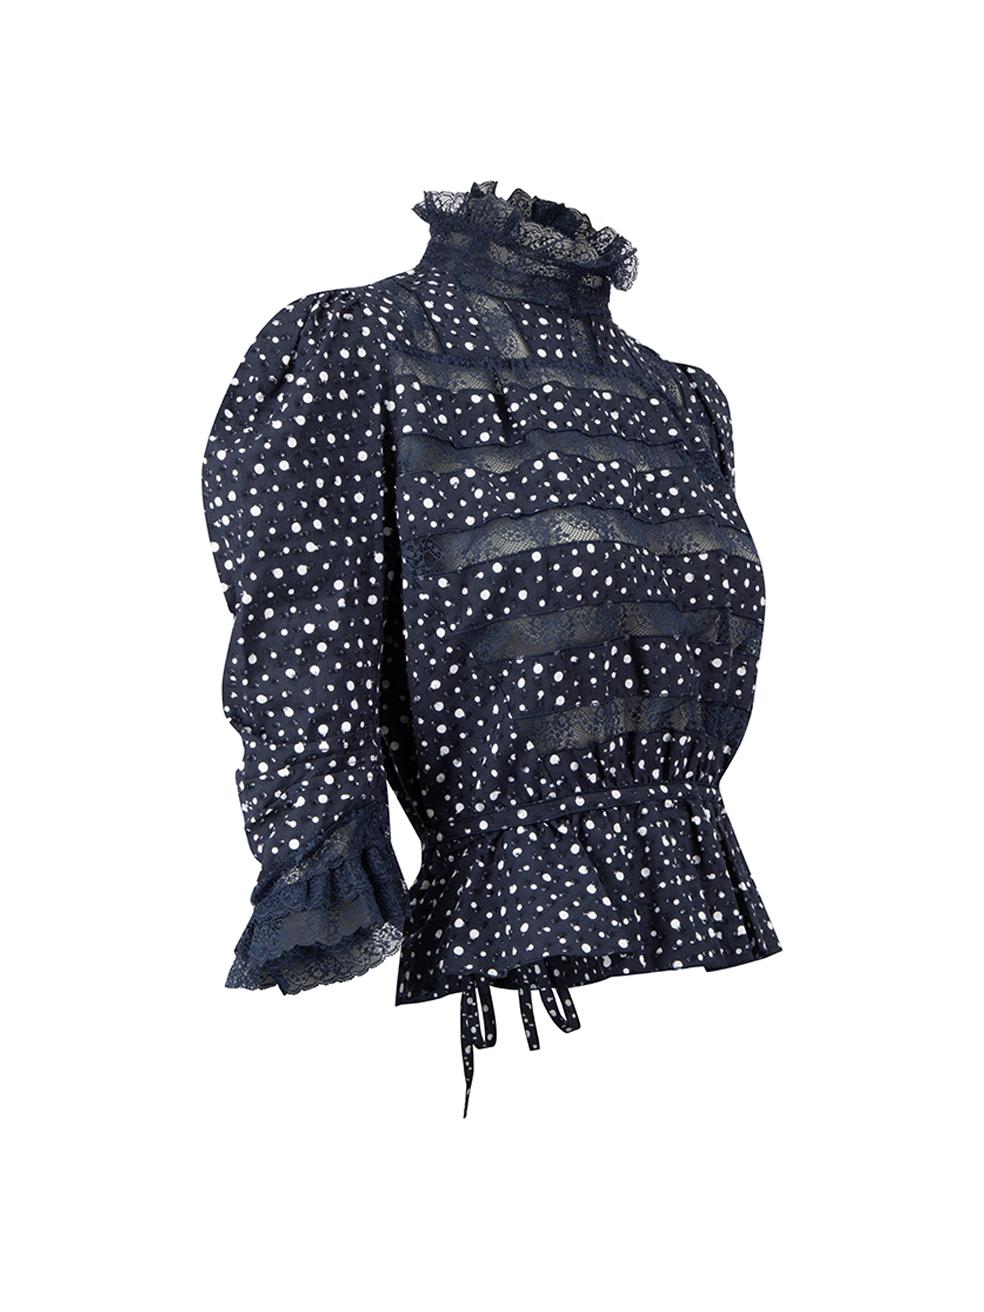 CONDITION is Very good. Hardly any visible wear to blouse is evident on this used Marc Jacobs designer resale item. 
 
 Details
  Navy
 Cotton
 Long sleeves blouse
 Polkadot pattern and textured
 Mock neck
 Lace detail
 Tie waisted
 Back buttons